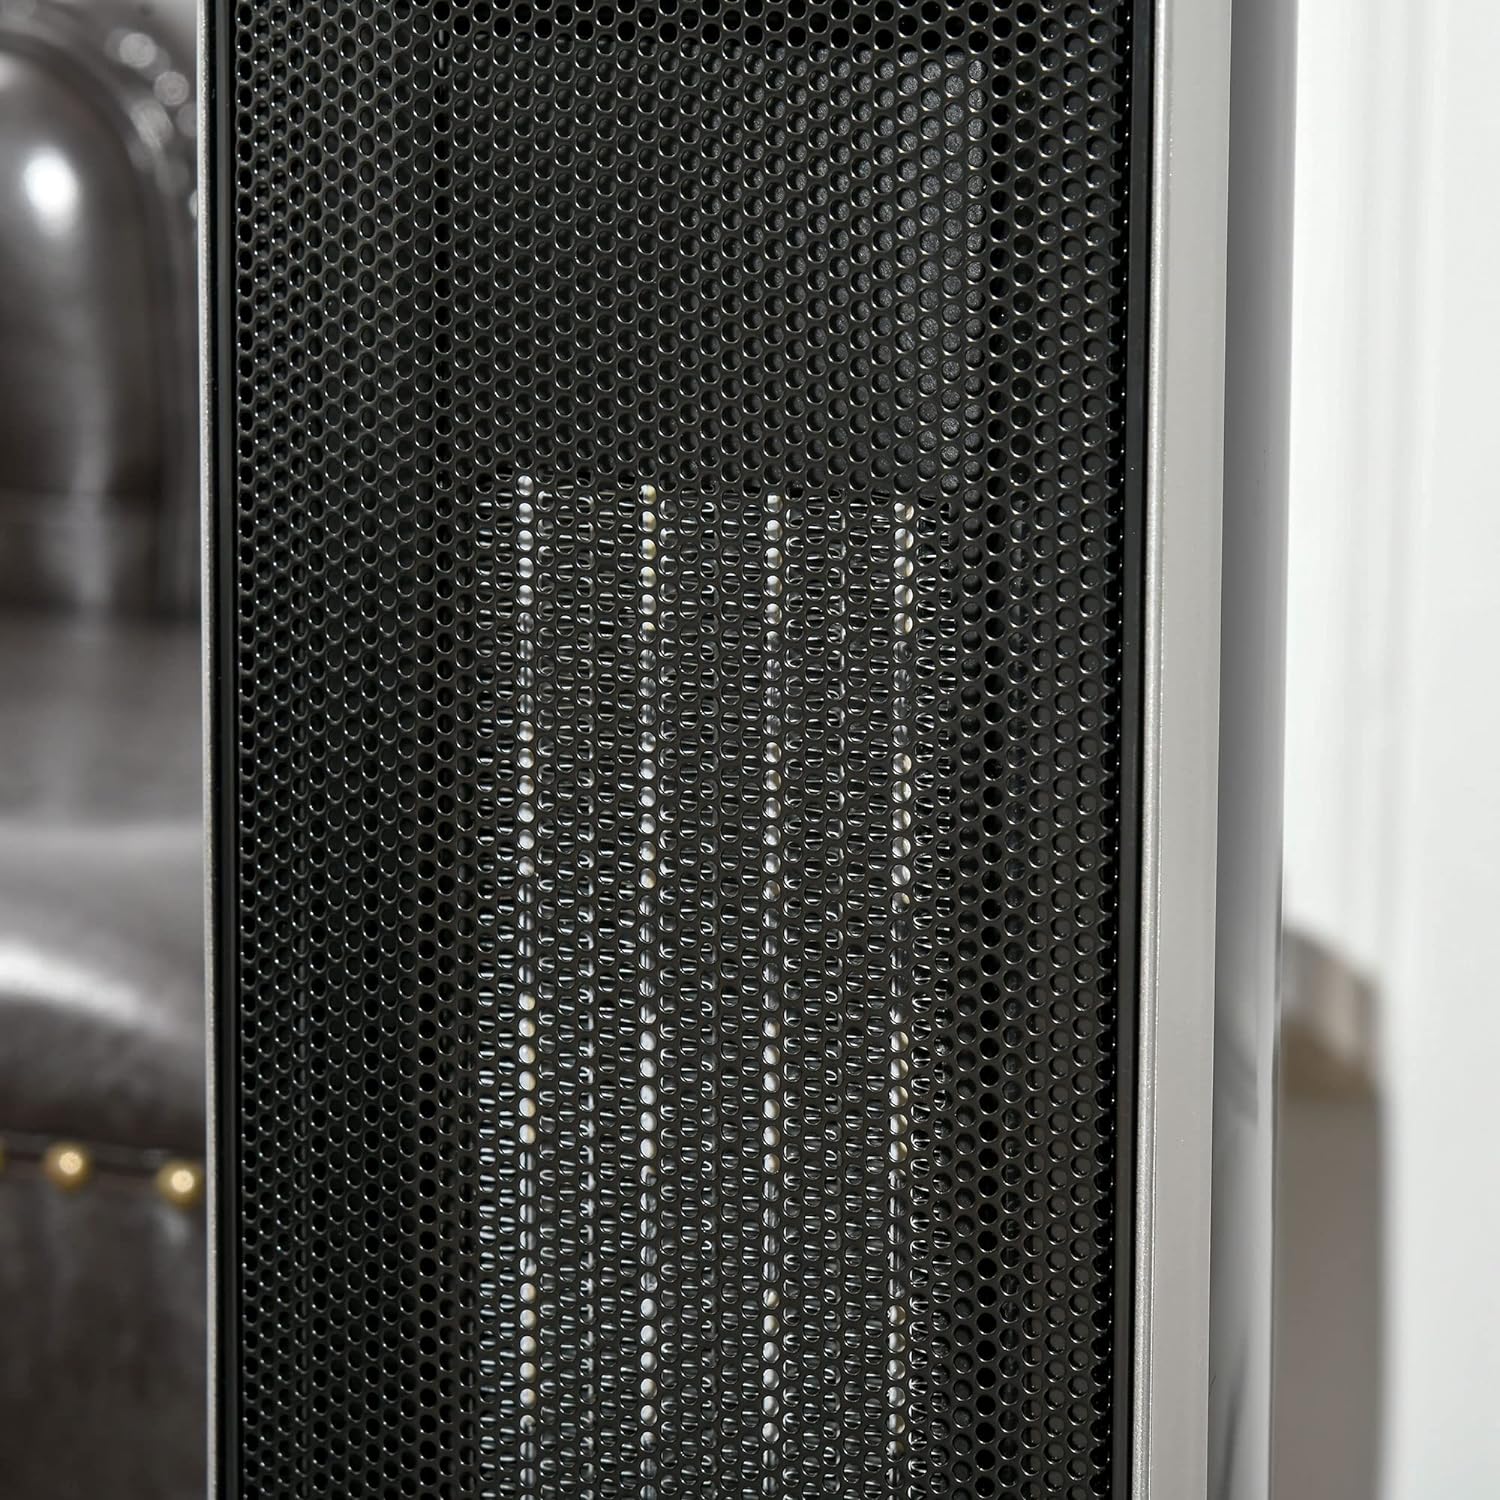 Maplin 2kW Portable Indoor Oscillating Ceramic Tower Space Heater with Adjustable Modes - Black - maplin.co.uk